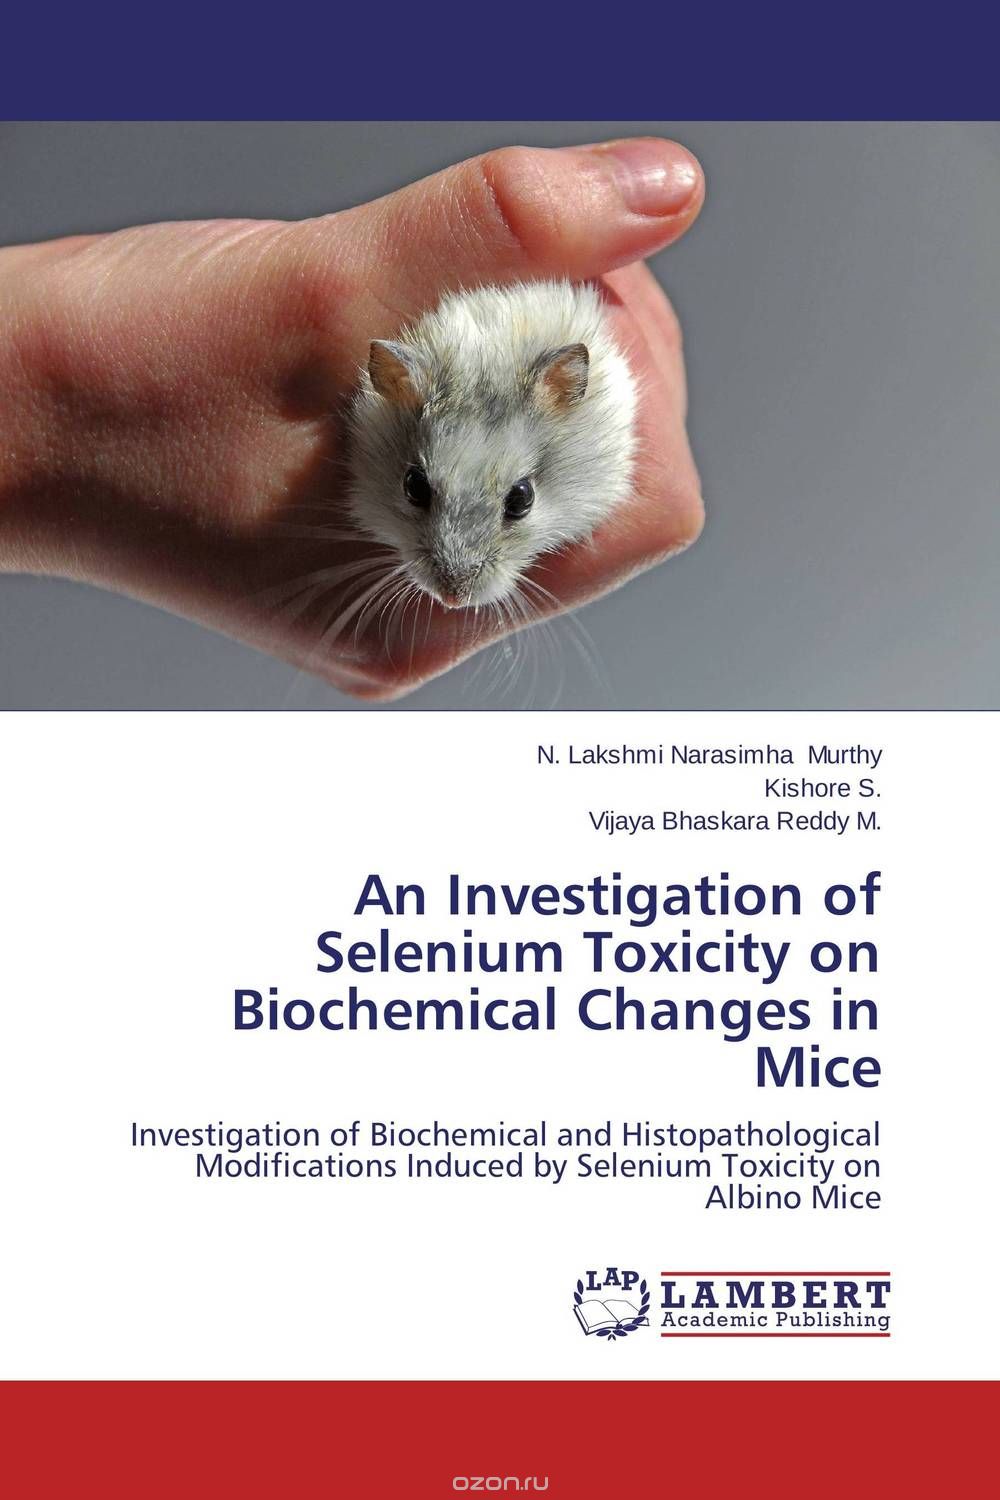 An Investigation of Selenium Toxicity on Biochemical Changes in Mice